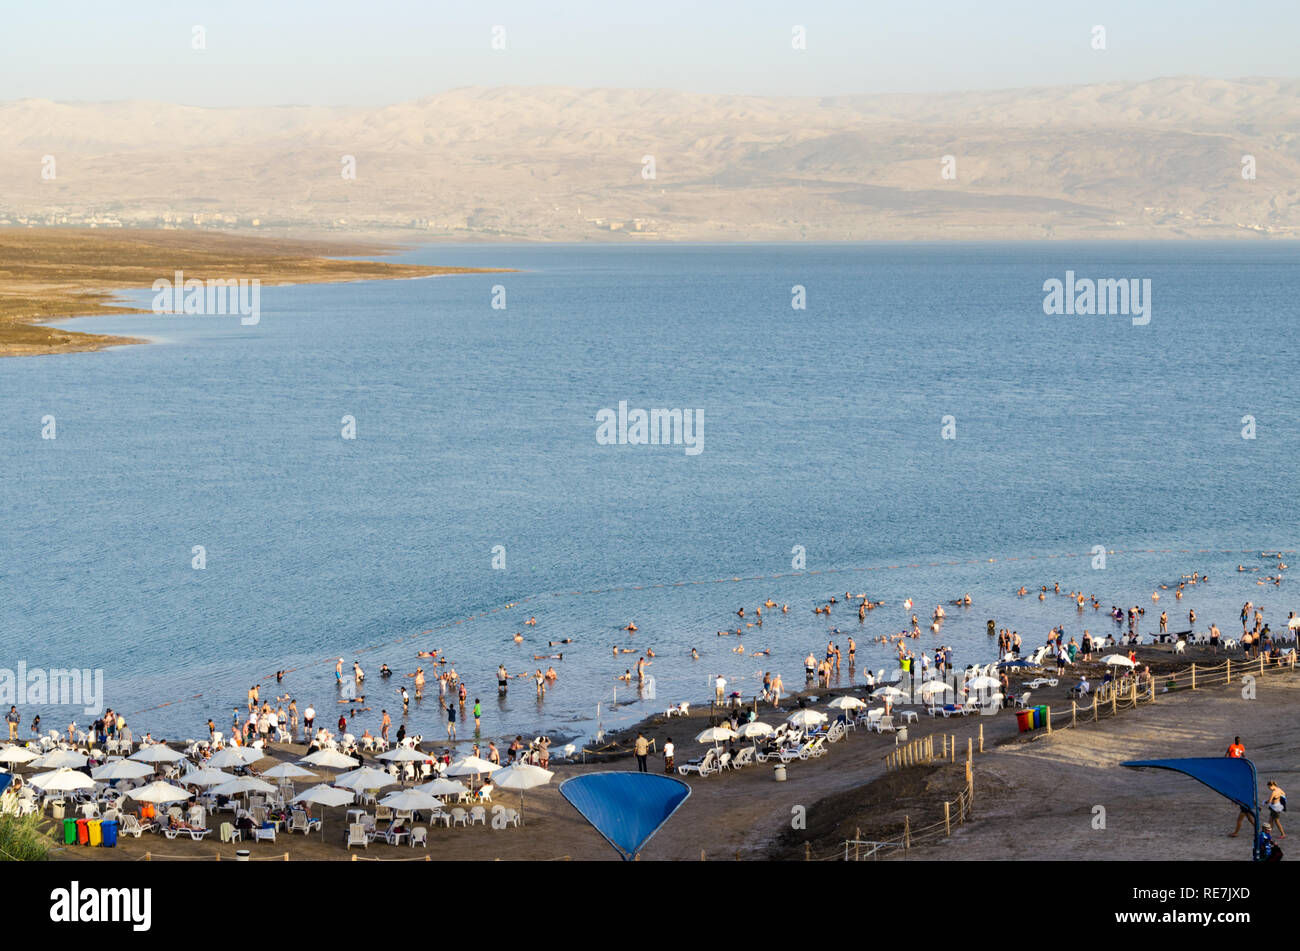 The Dead Sea (West Bank), hypersaline and lowest lake in the world, at -430m below sea level Stock Photo